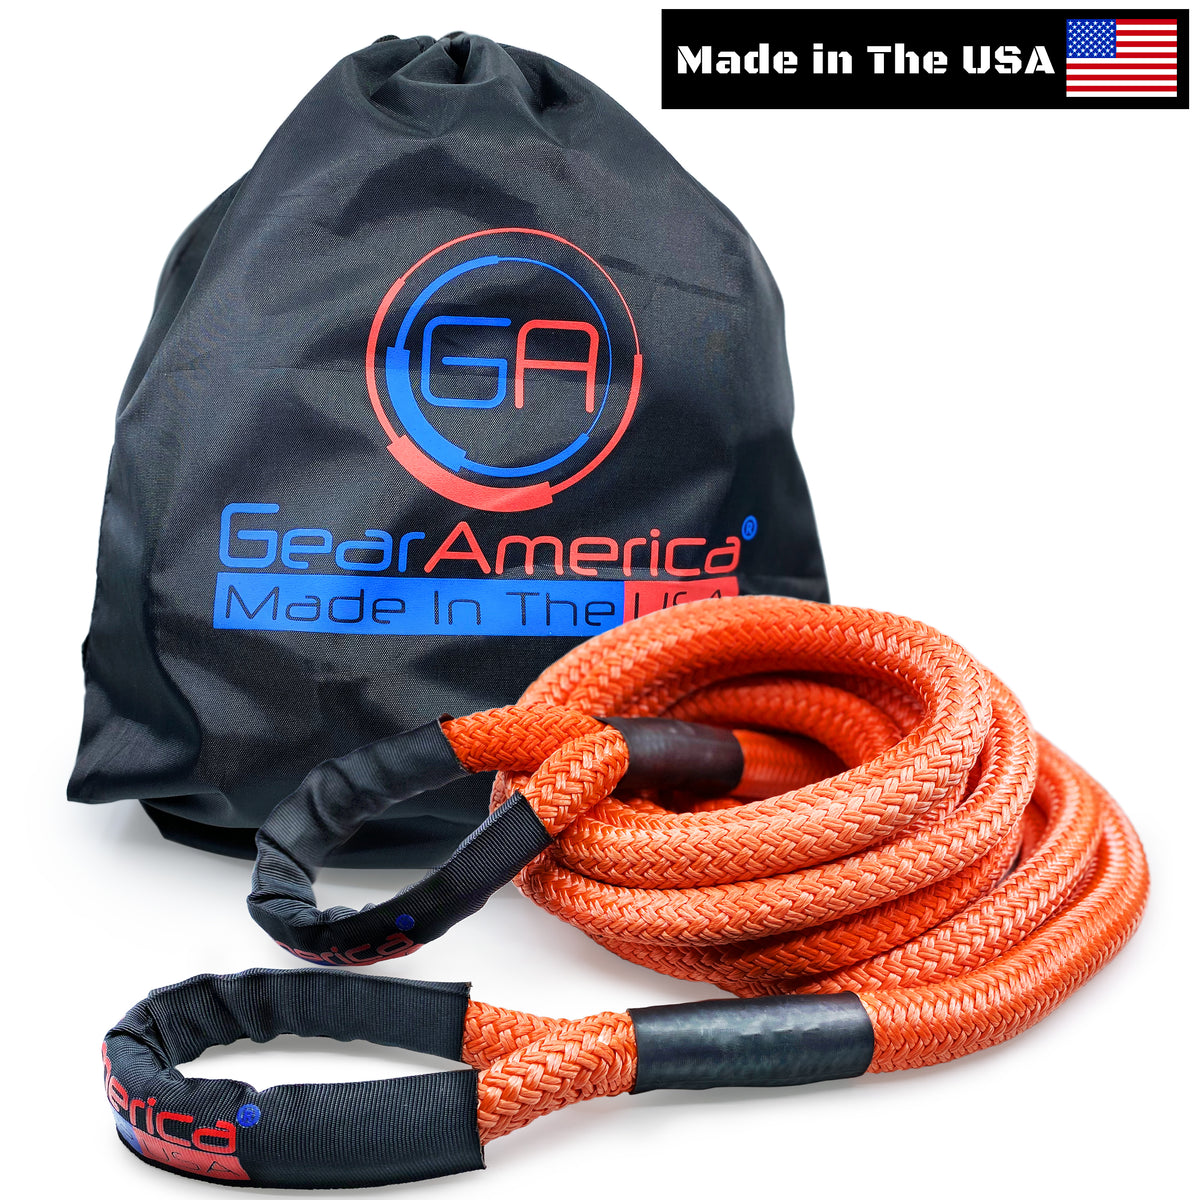 Kinetic Recovery Rope 7/8” x 30', 28,500 lbs Breaking Strength